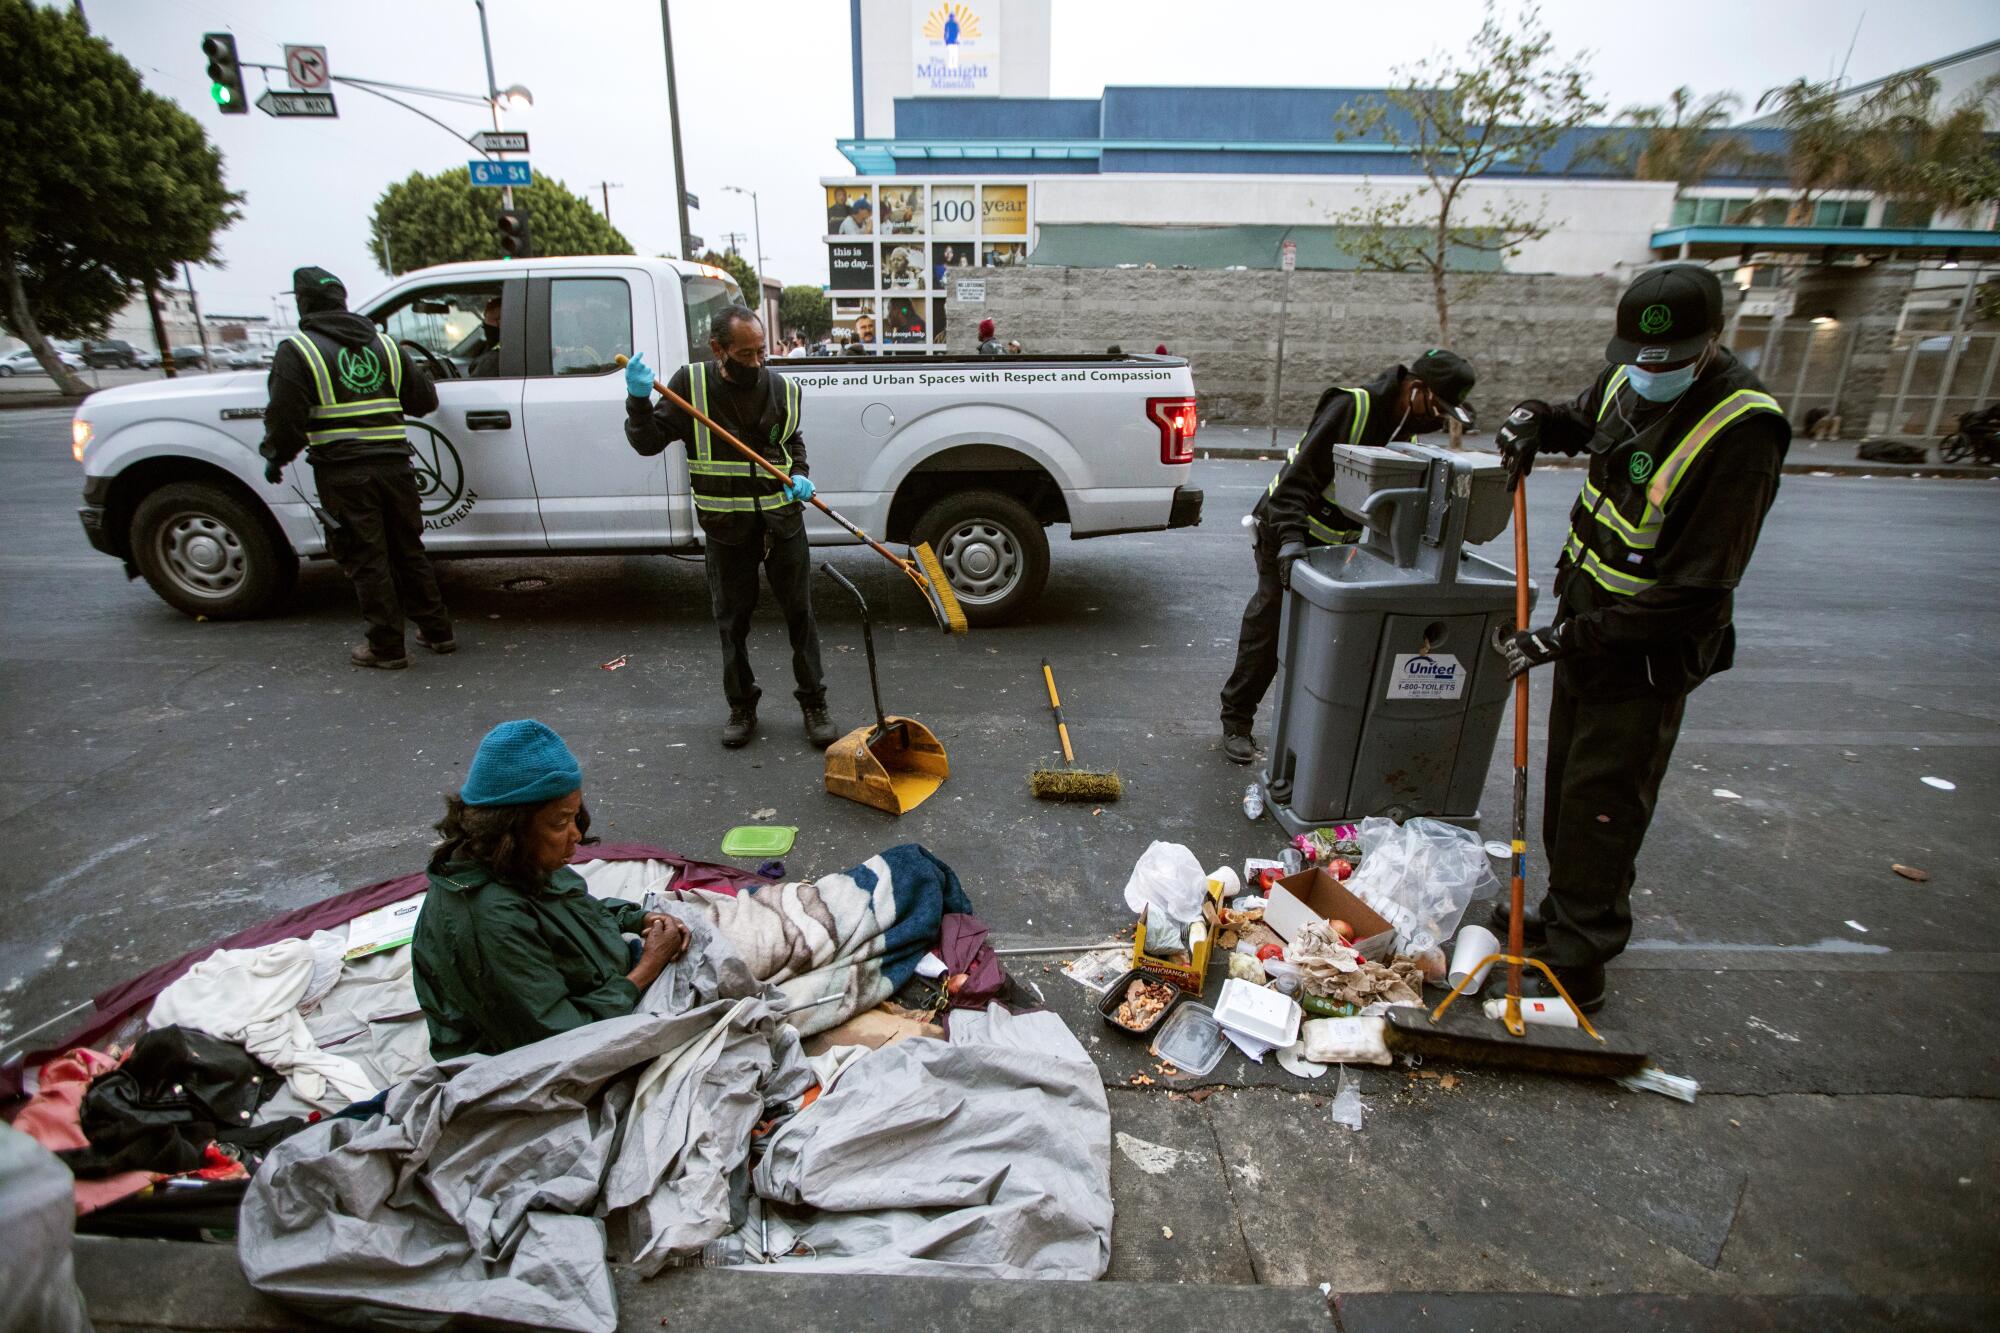 Workers carefully clean around a woman who is waking up on the sidewalk in the early morning in skid row